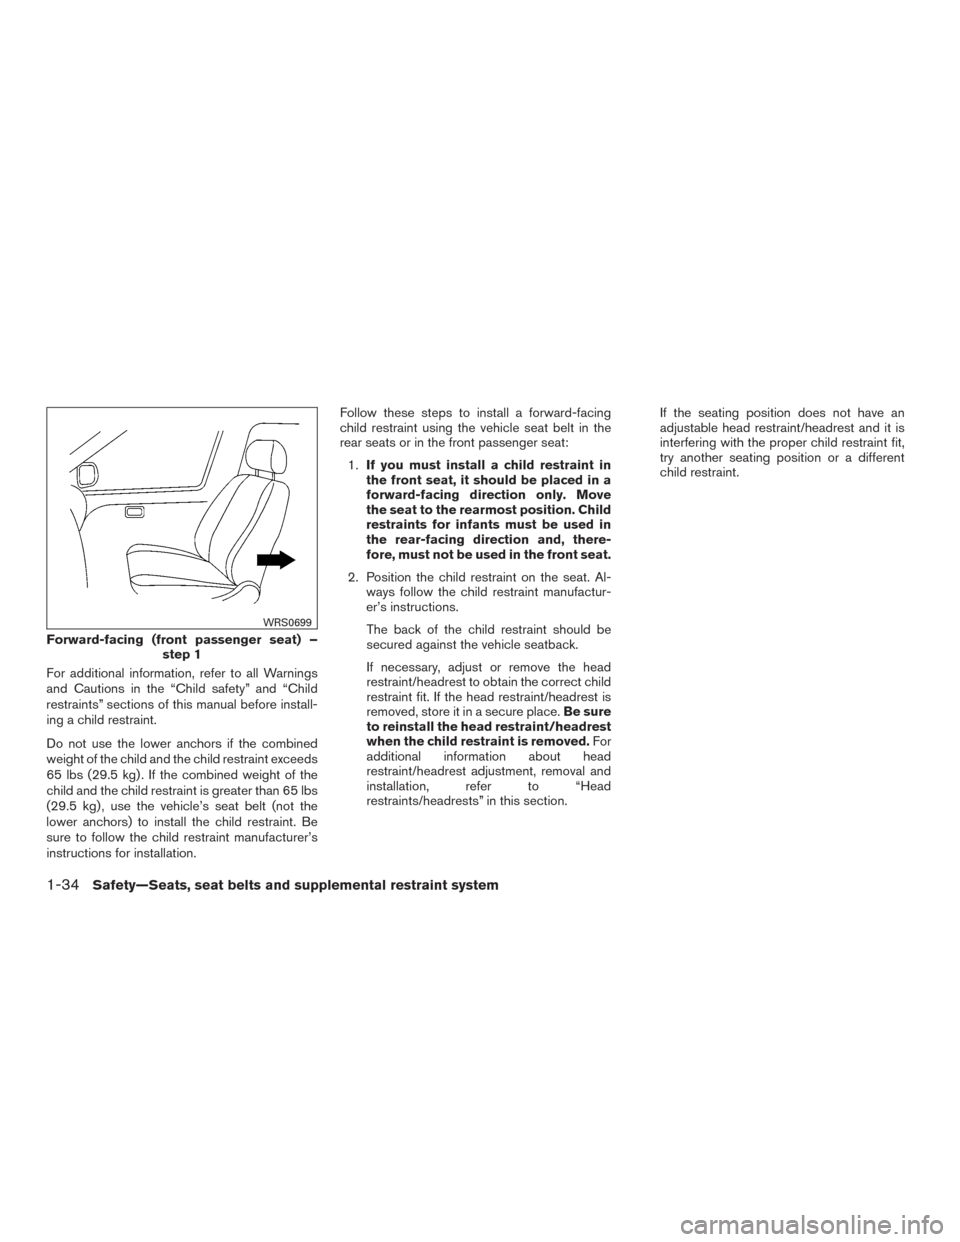 NISSAN SENTRA 2016 B17 / 7.G Owners Manual For additional information, refer to all Warnings
and Cautions in the “Child safety” and “Child
restraints” sections of this manual before install-
ing a child restraint.
Do not use the lower 